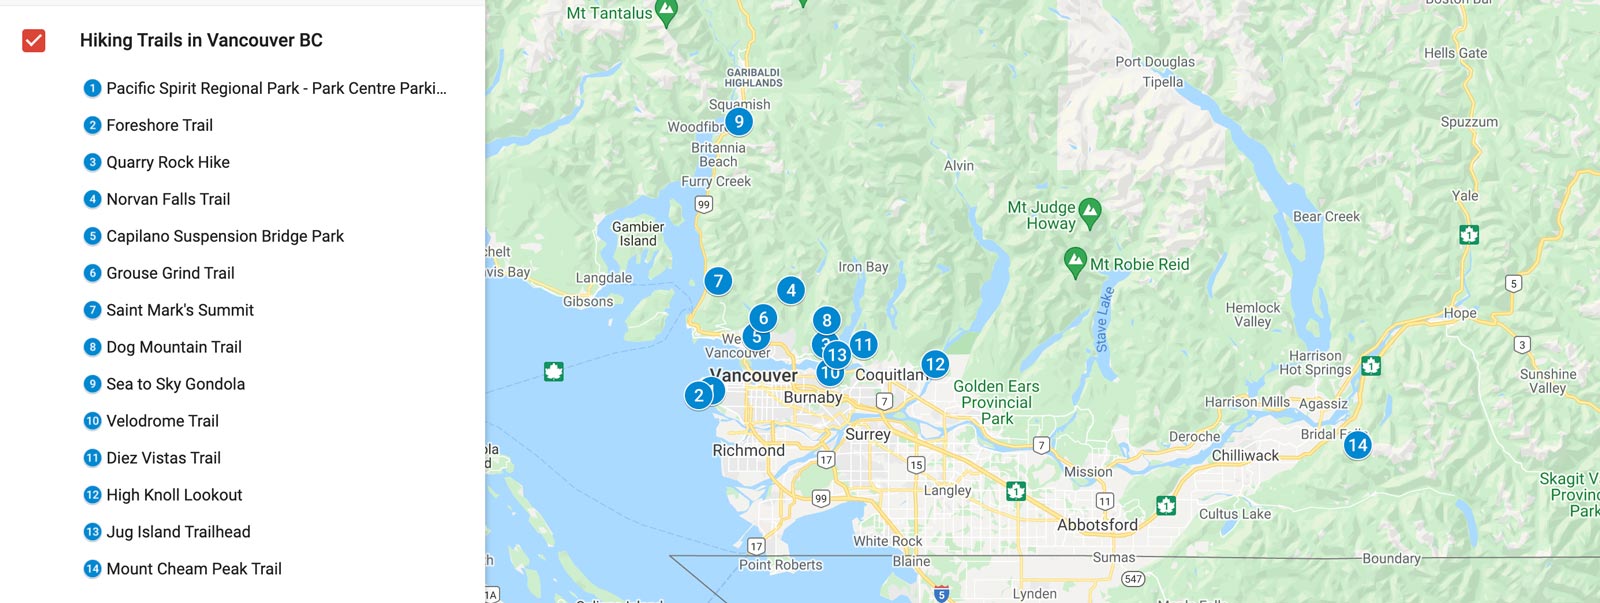 best hiking trails in vancouver map